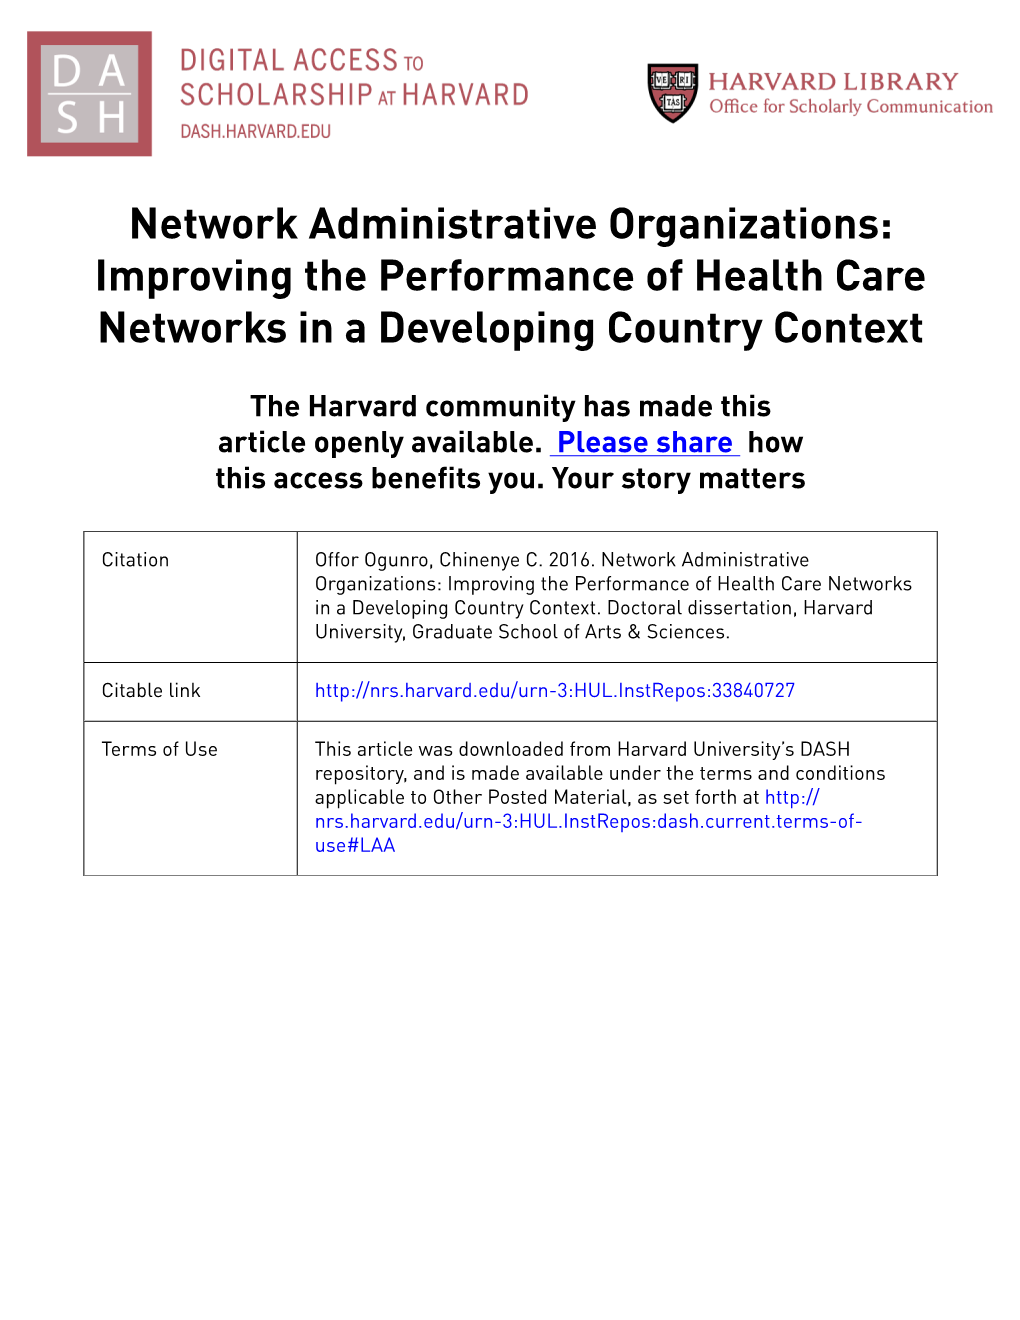 Improving the Performance of Health Care Networks in a Developing Country Context